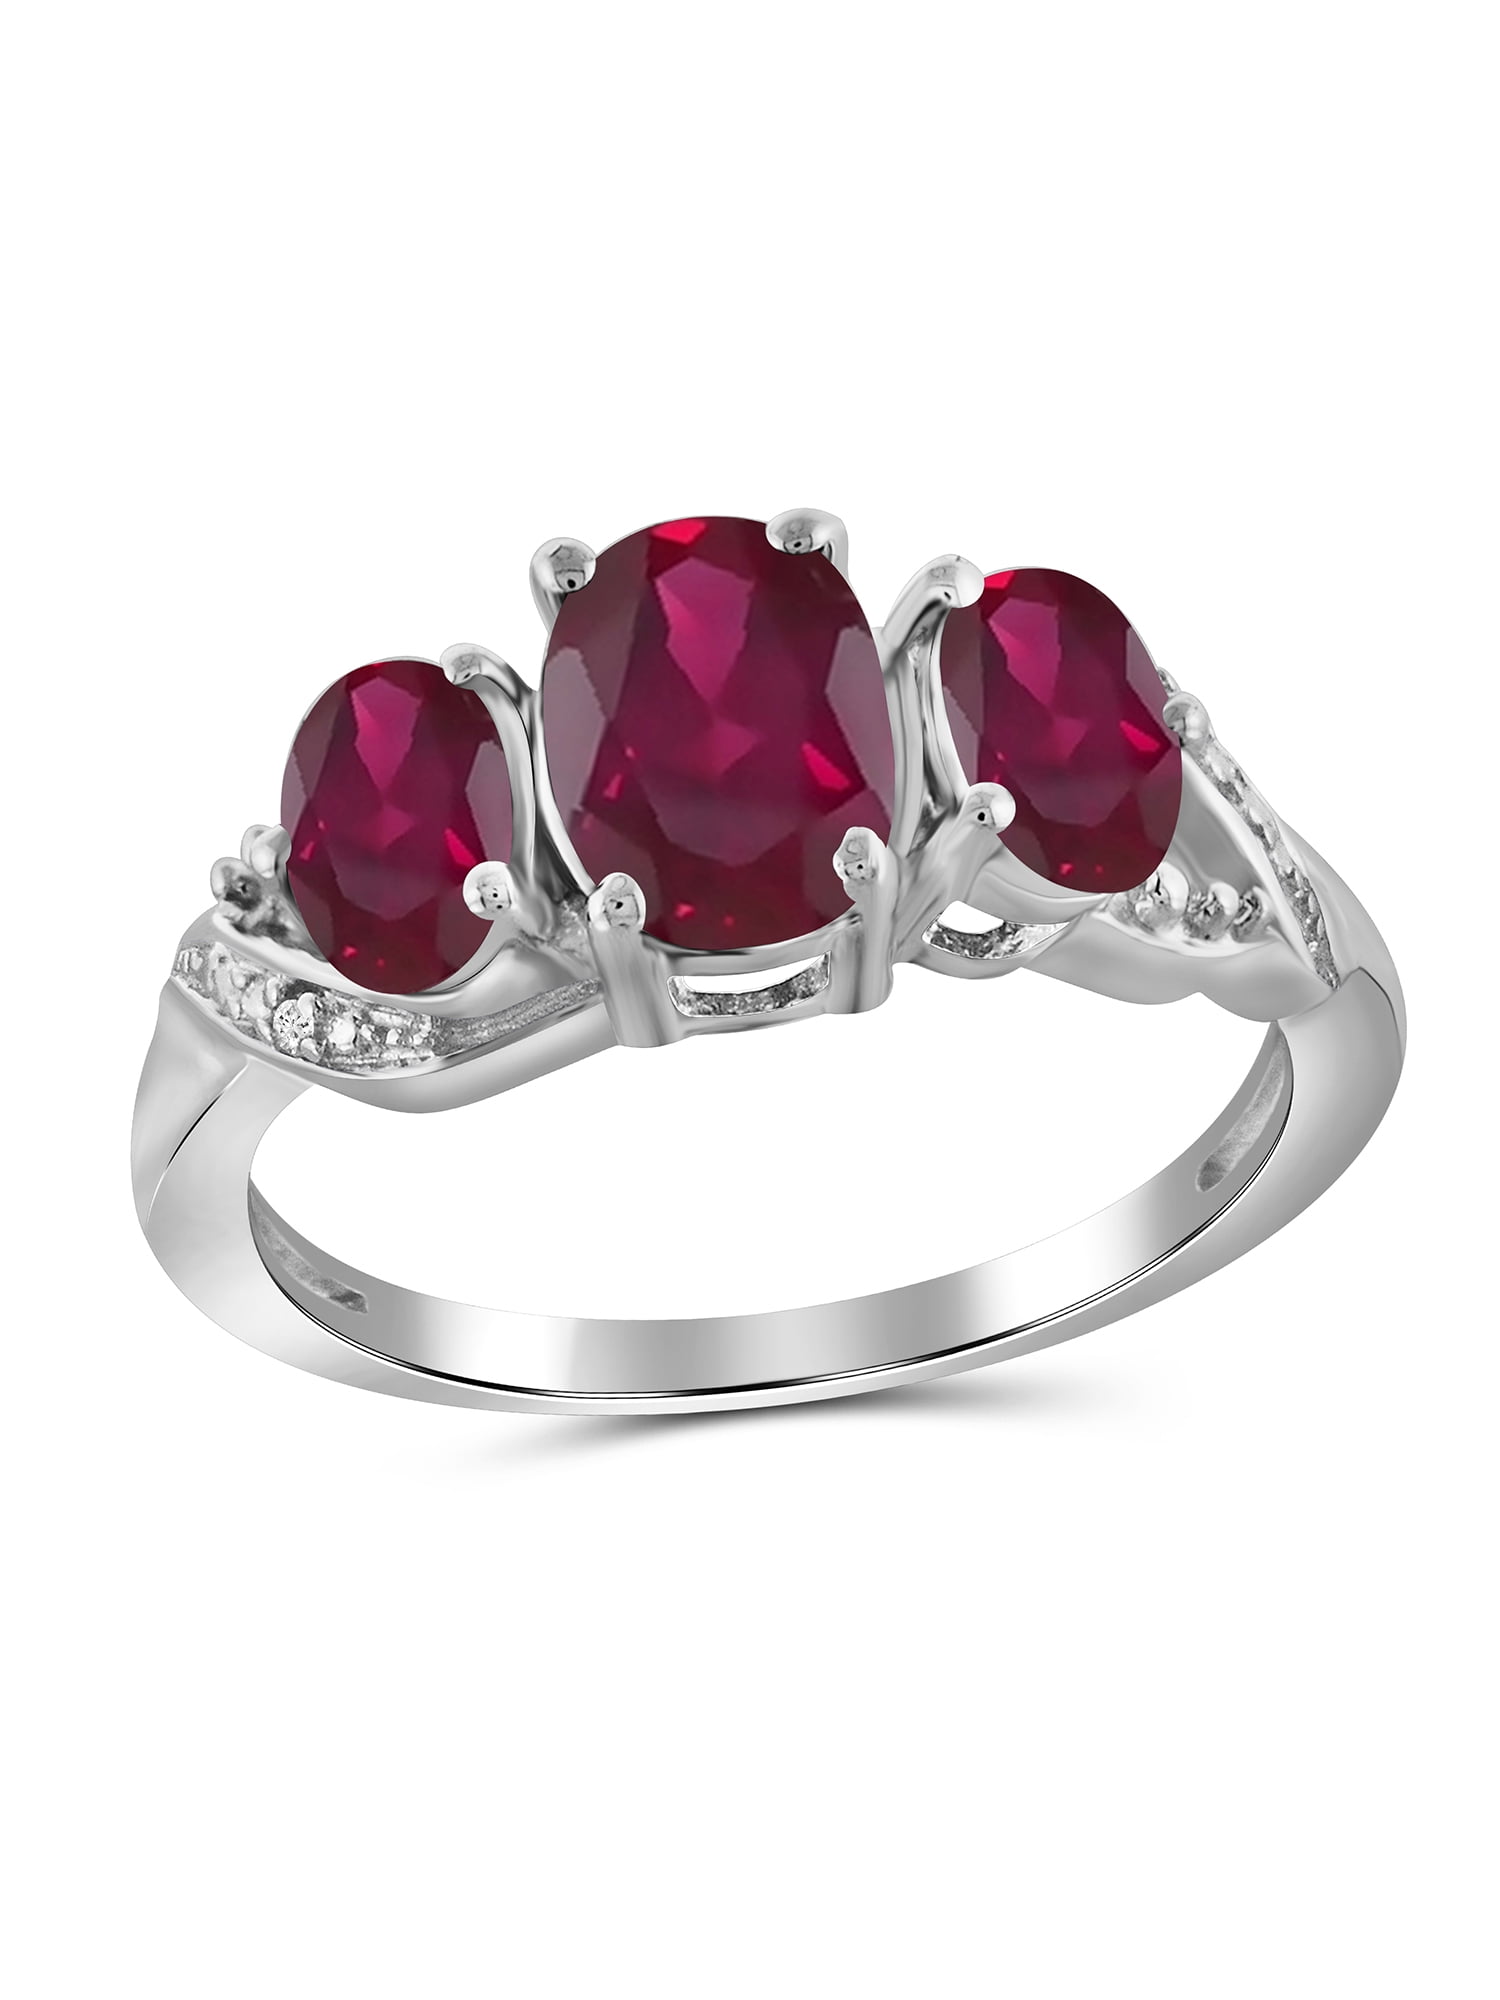 JewelersClub Ruby Ring Birthstone Jewelry – 2.40 Carat Ruby 0.925 Sterling  Silver Ring Jewelry – Gemstone Rings with Hypoallergenic 0.925 Sterling  Silver Band - Walmart.com